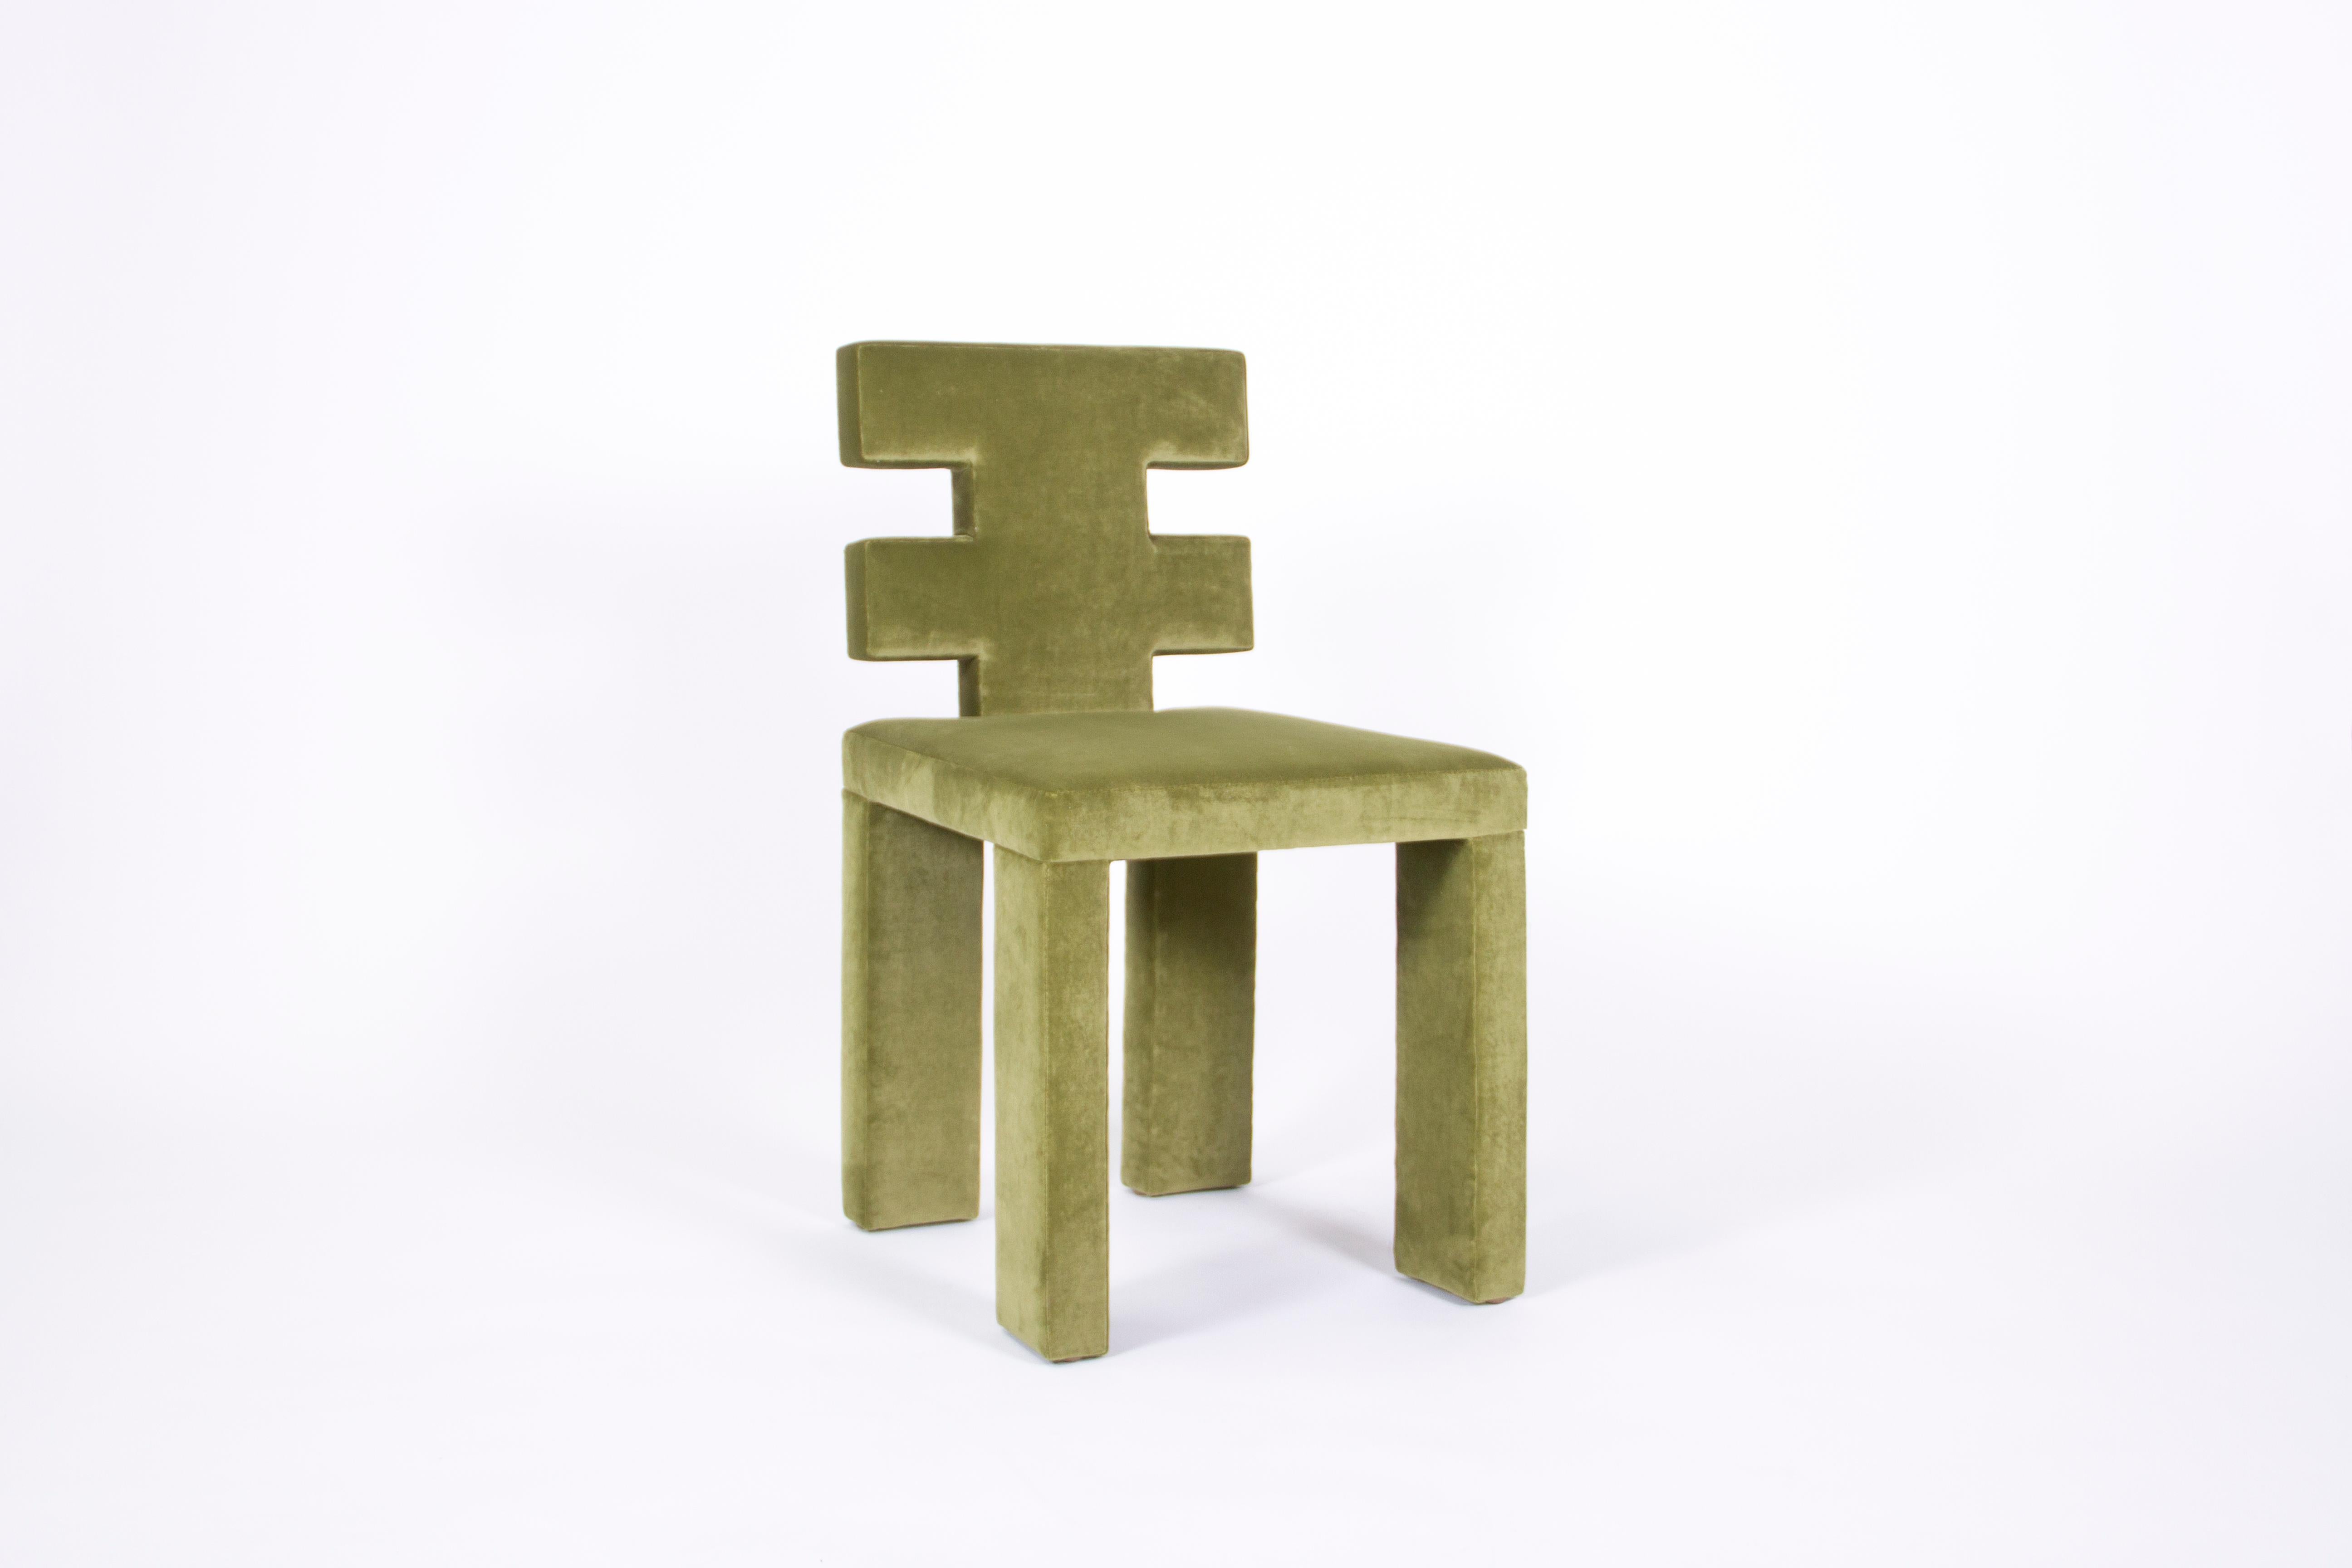 Green H-chair by Estudio Persona
Dimensions: W 45.8 x D 48.3 x H 78.8 cm
Materials: Mohair fabric

Upholstered dining chair. Shown in mohair fabric.
COM option available.
Customizations available.

Estudio Persona was created by Emiliana